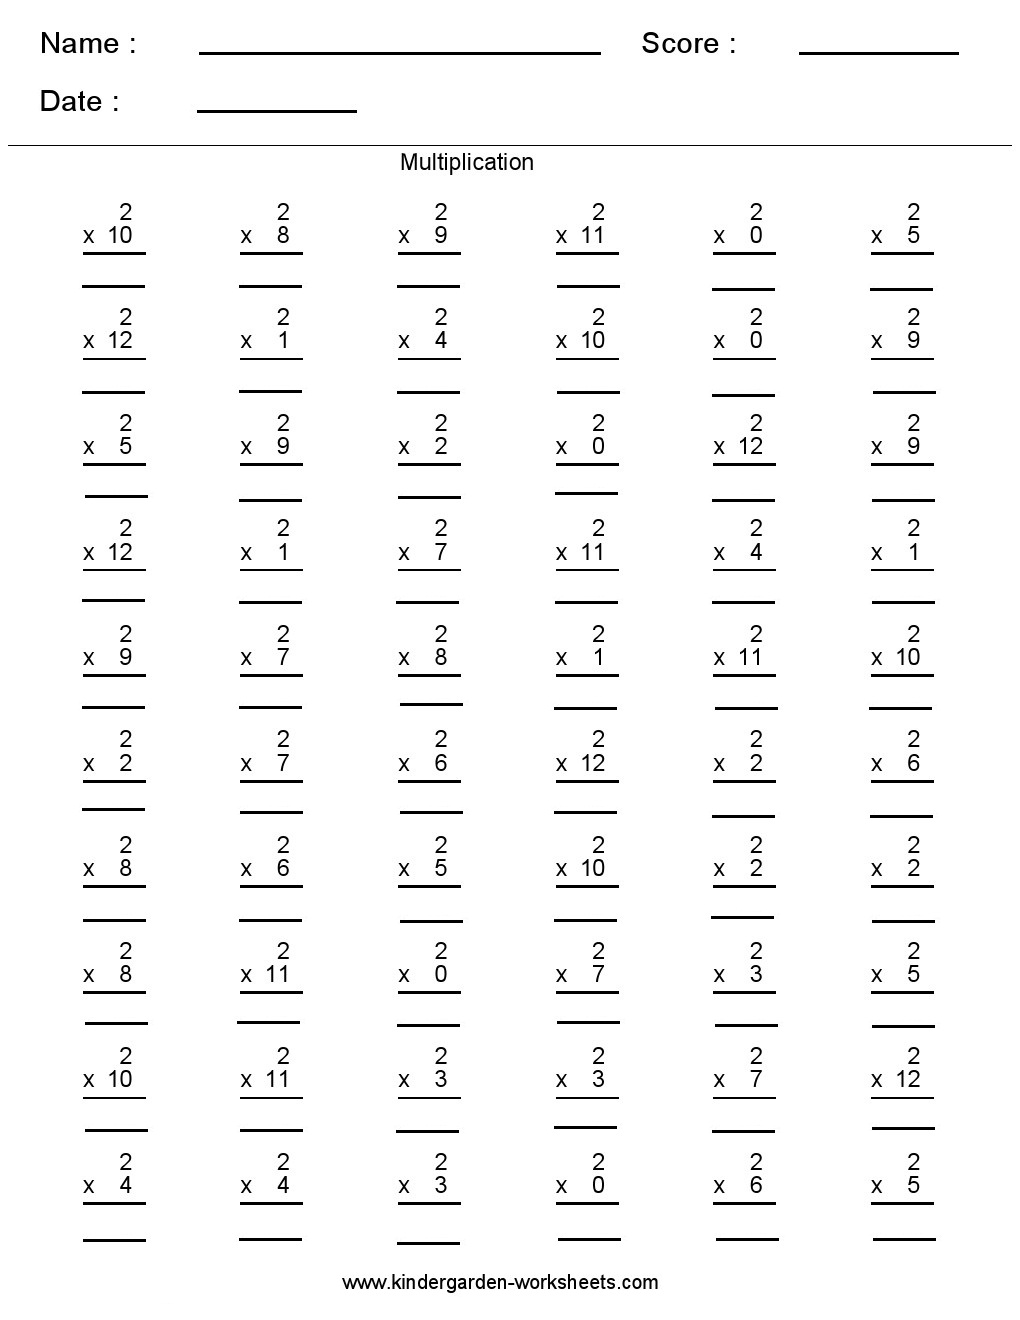 5th-grade-math-worksheets-multiplication-and-division-times-tables-fifth-grade-multiplication